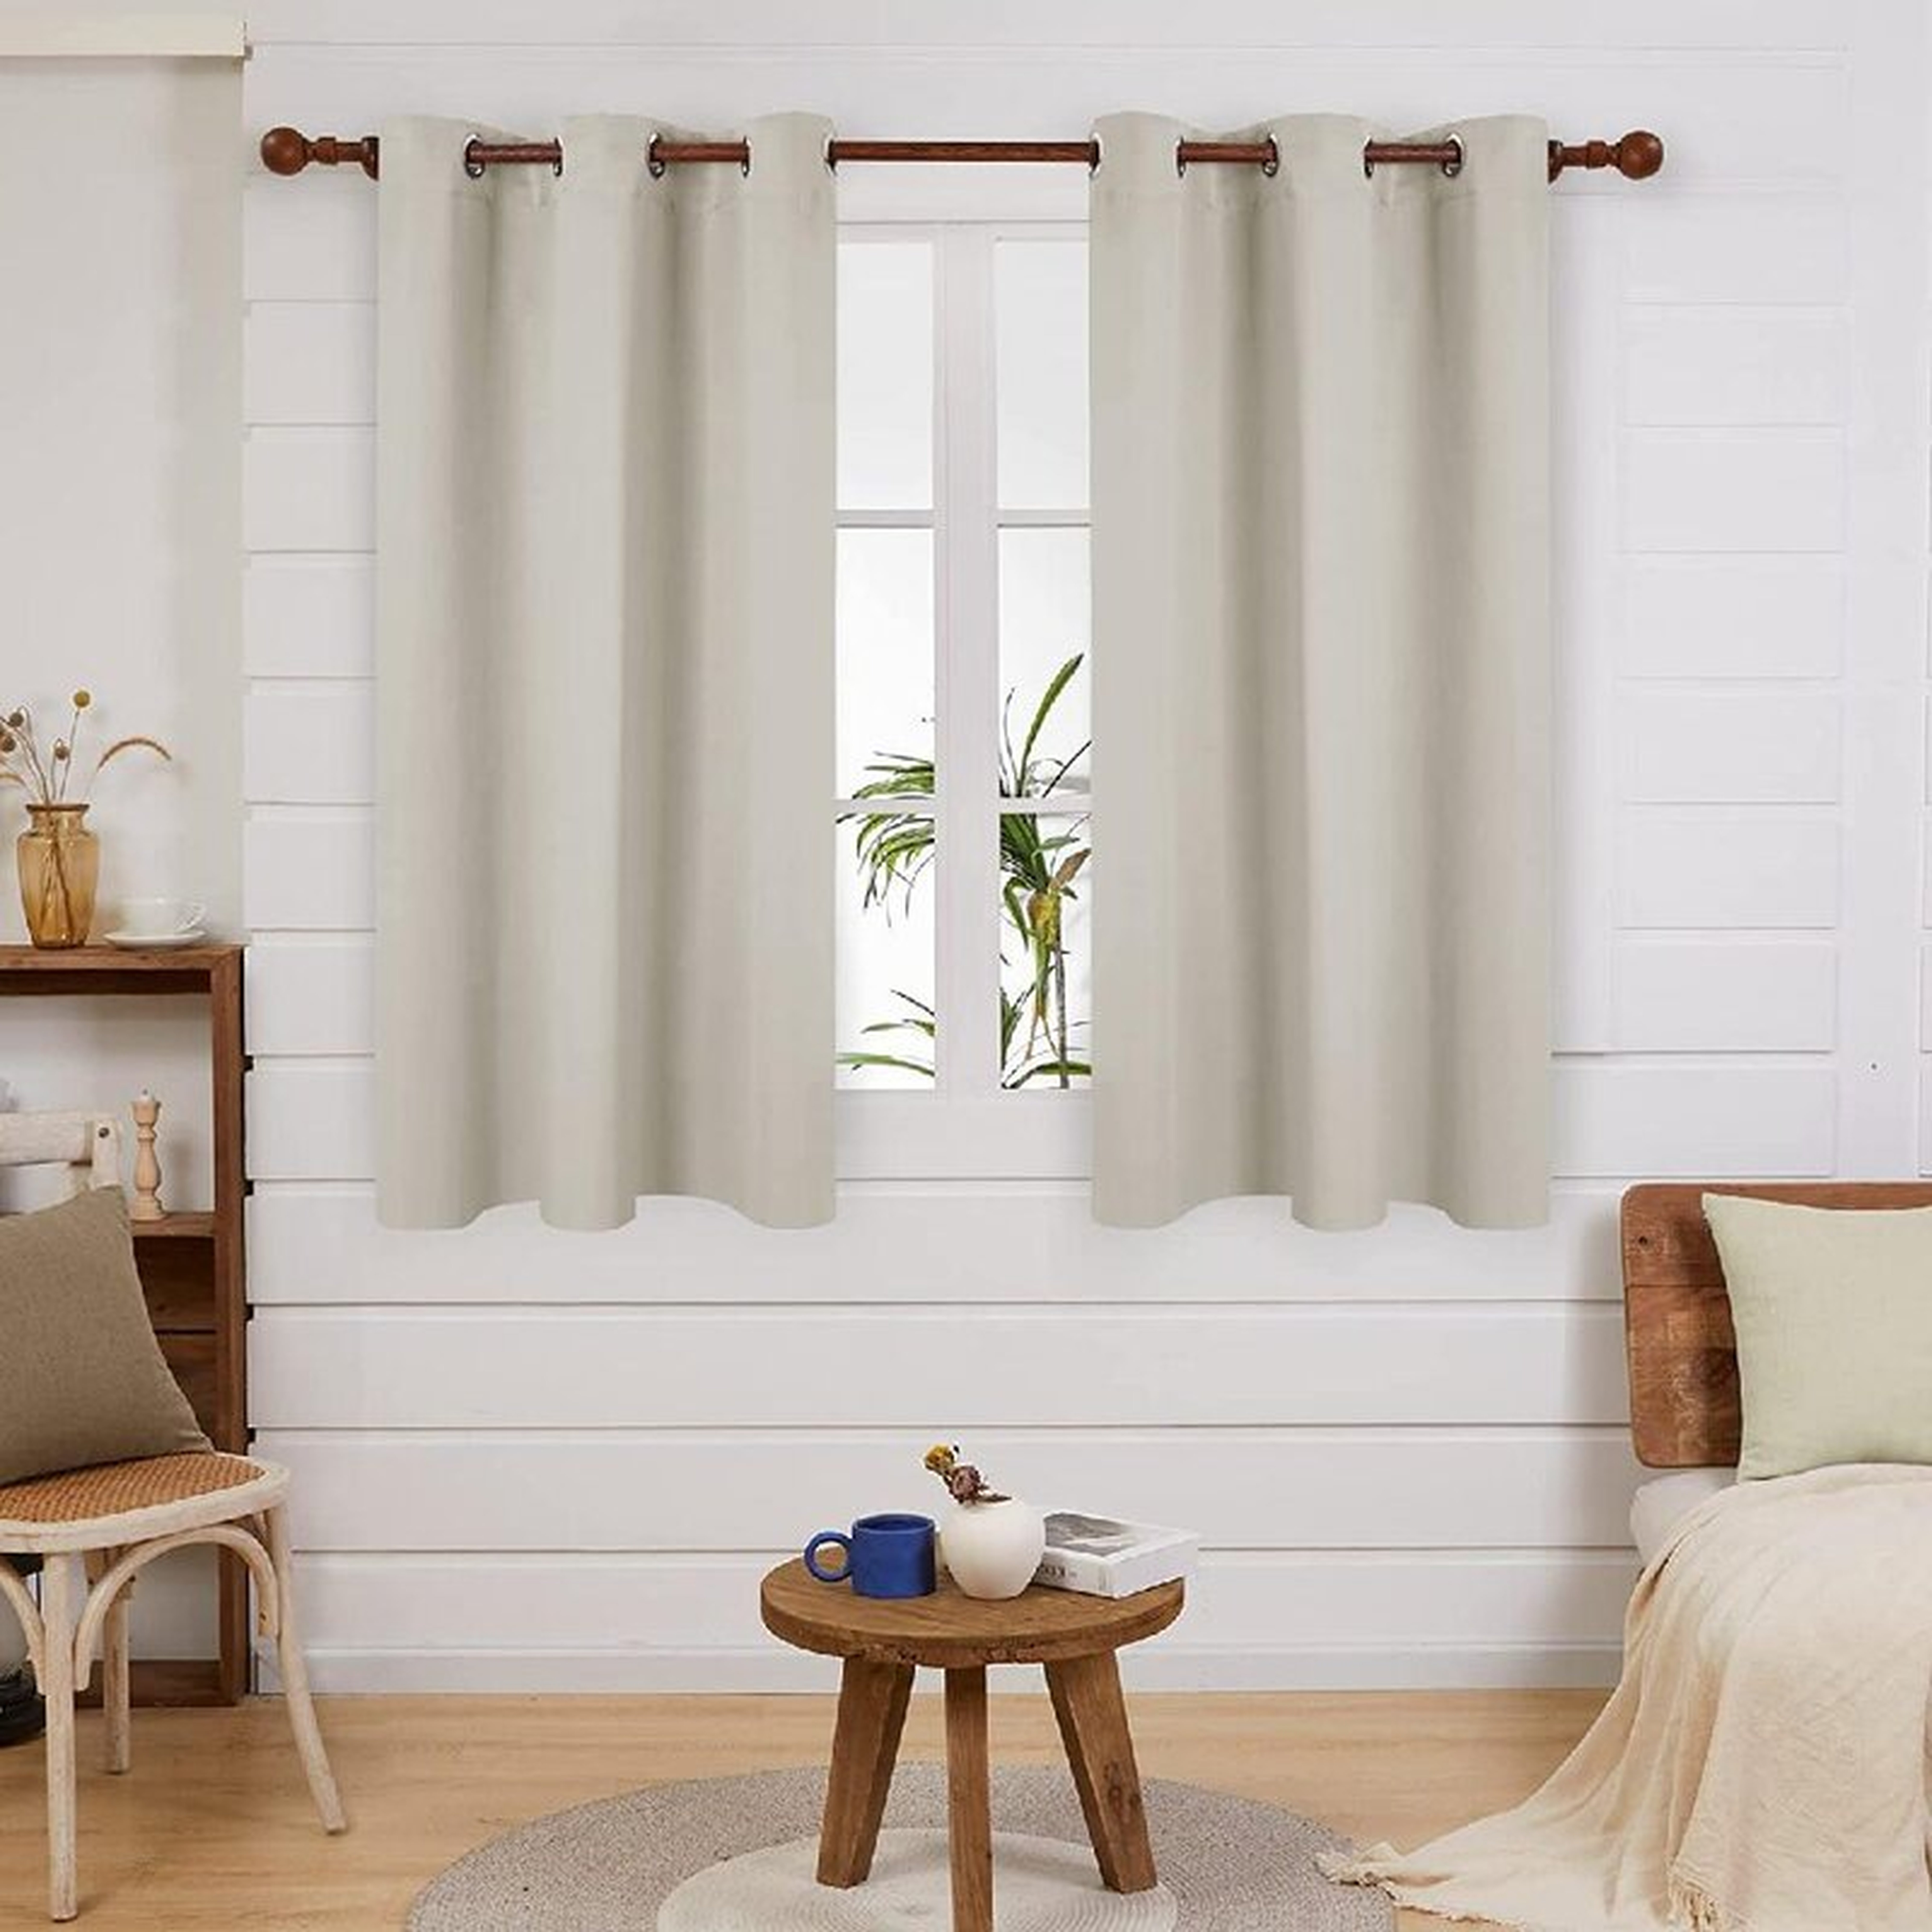 Thermal Insulted Blackout Bedroom Curtains, Room Darkening Curtain Panels For Living Room, 42X72 Inch  Thermal Insulted Blackout Bedroom Curtains, Room Darkening Curtain Panels For Living Room, 54L x42W Inch  Thermal Insulted Blackout Bedroom Curtains, Ro - Wayfair